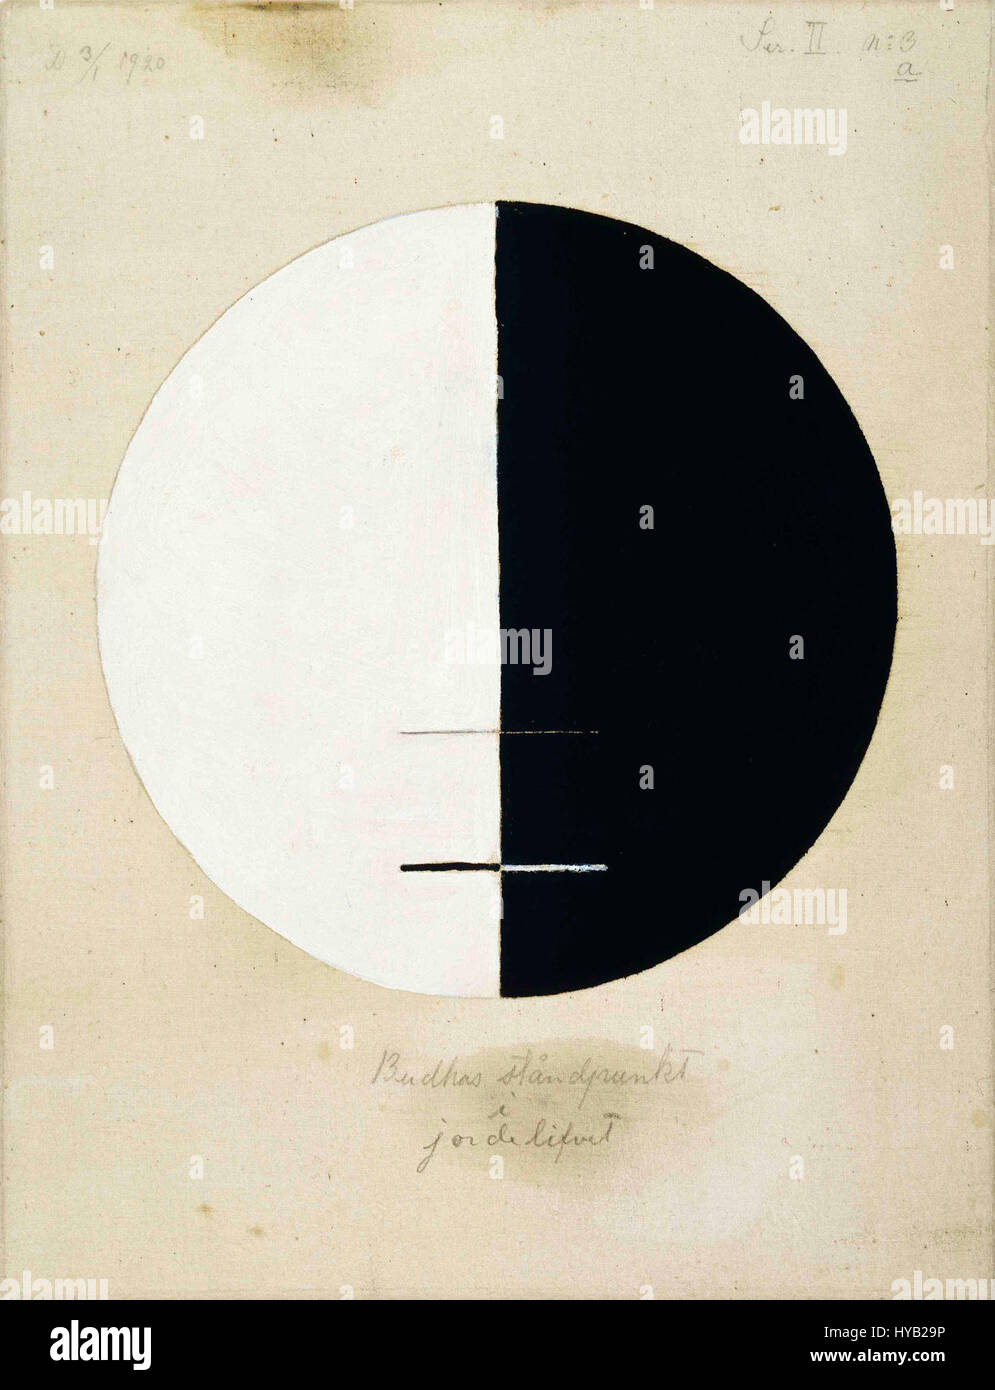 Hilma af Klint   1920   Buddha's Standpoint in the Earthly Life   No 3a Stock Photo